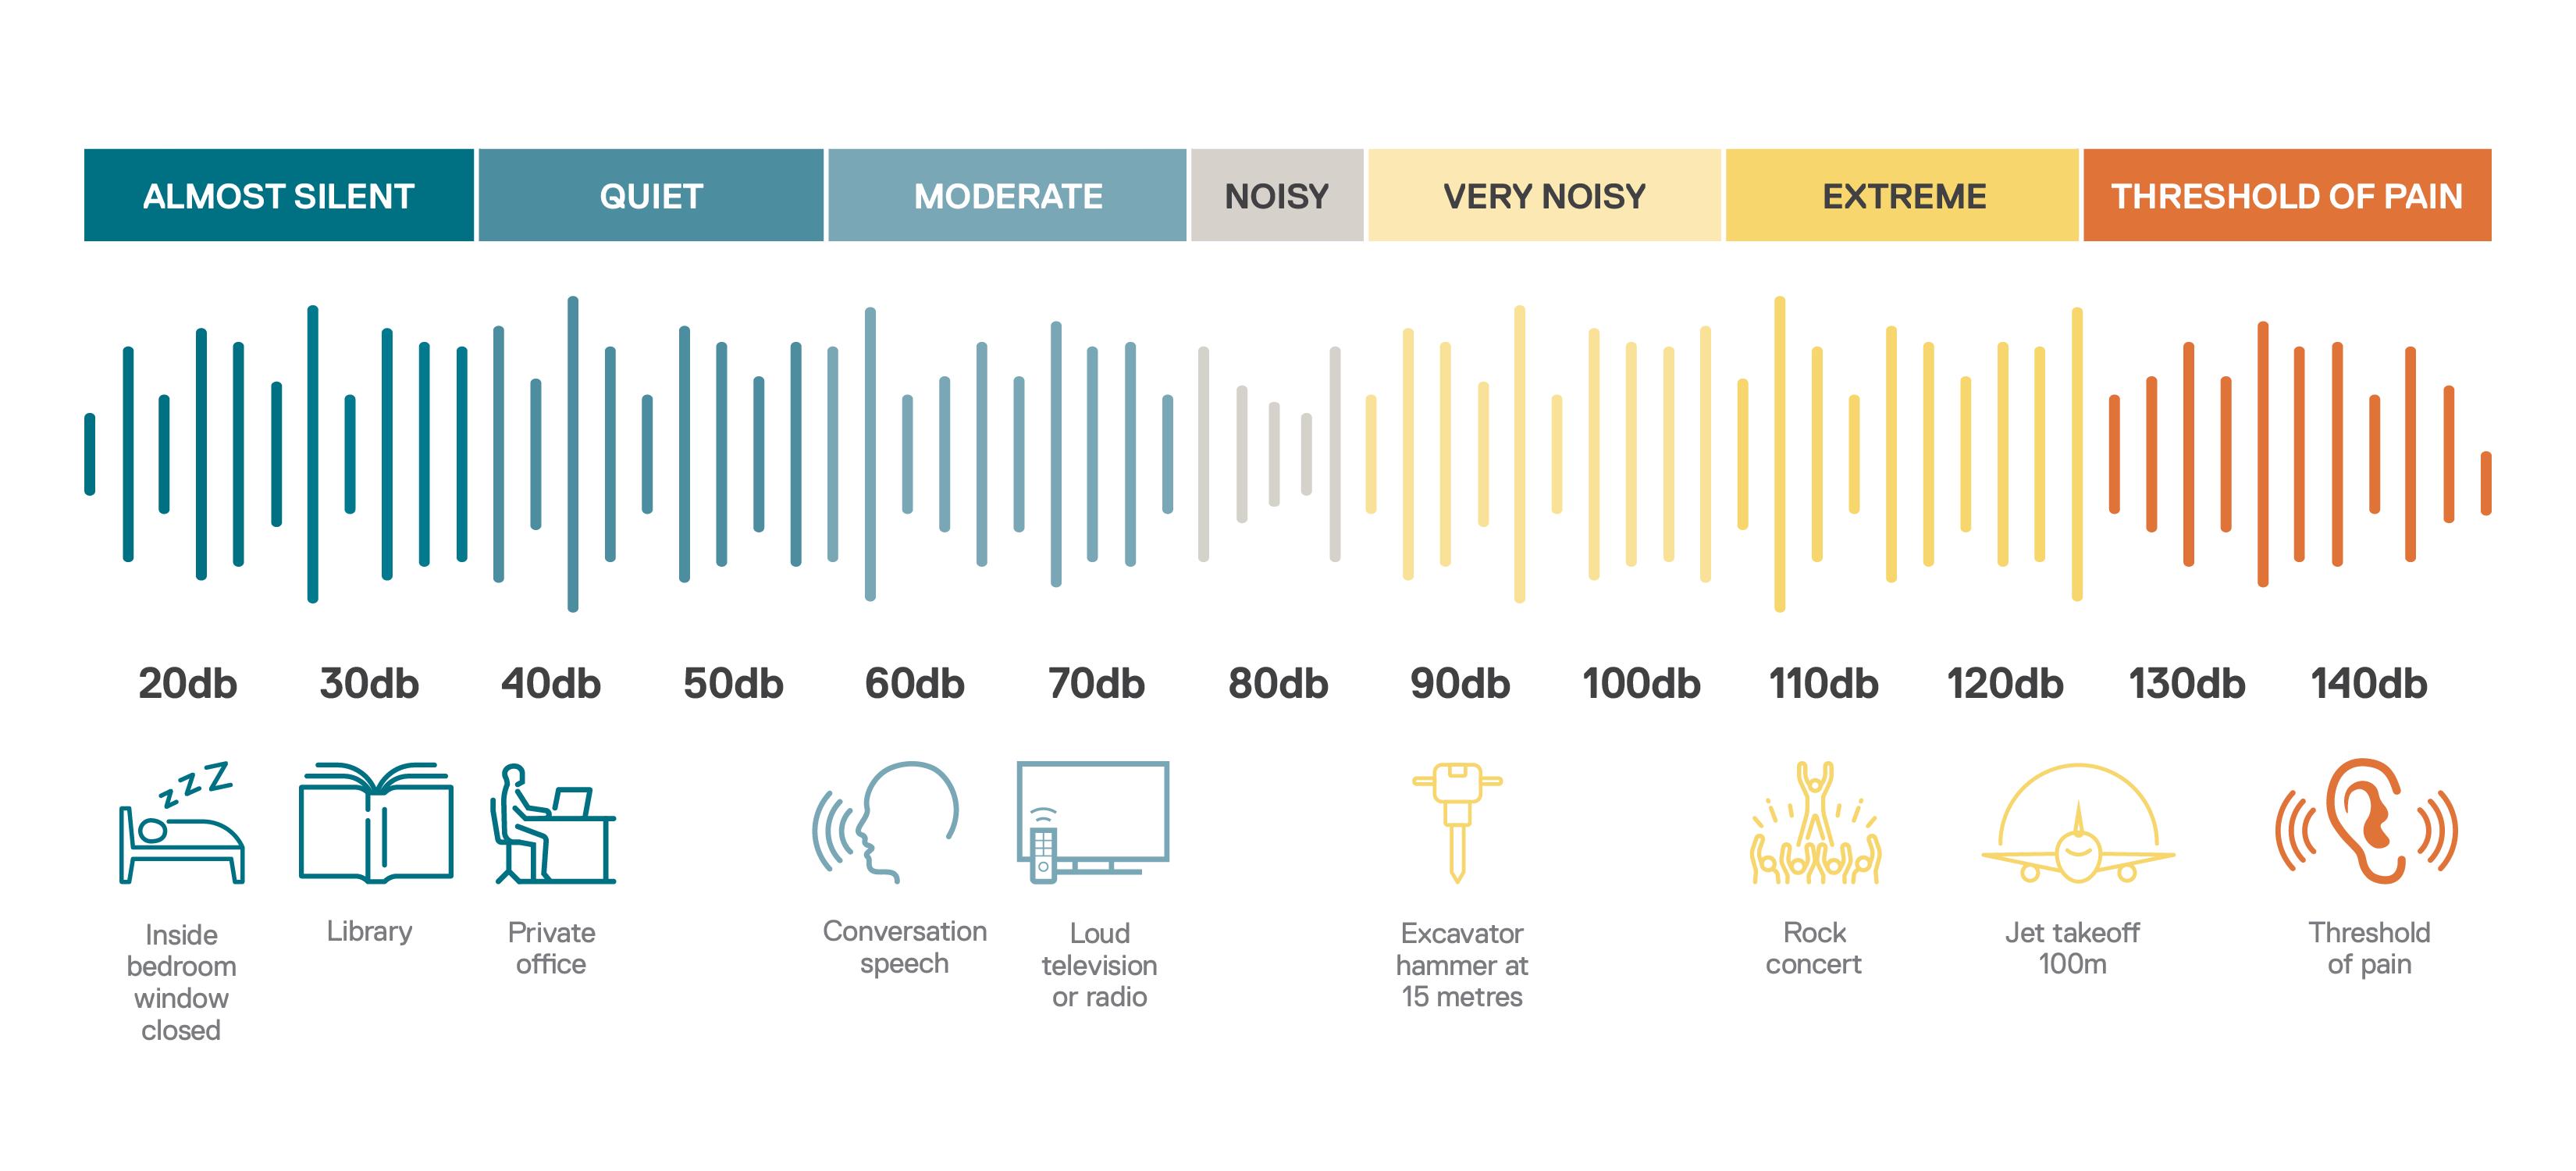 Graphic showing a range of noises and their perceived noise level in decibels